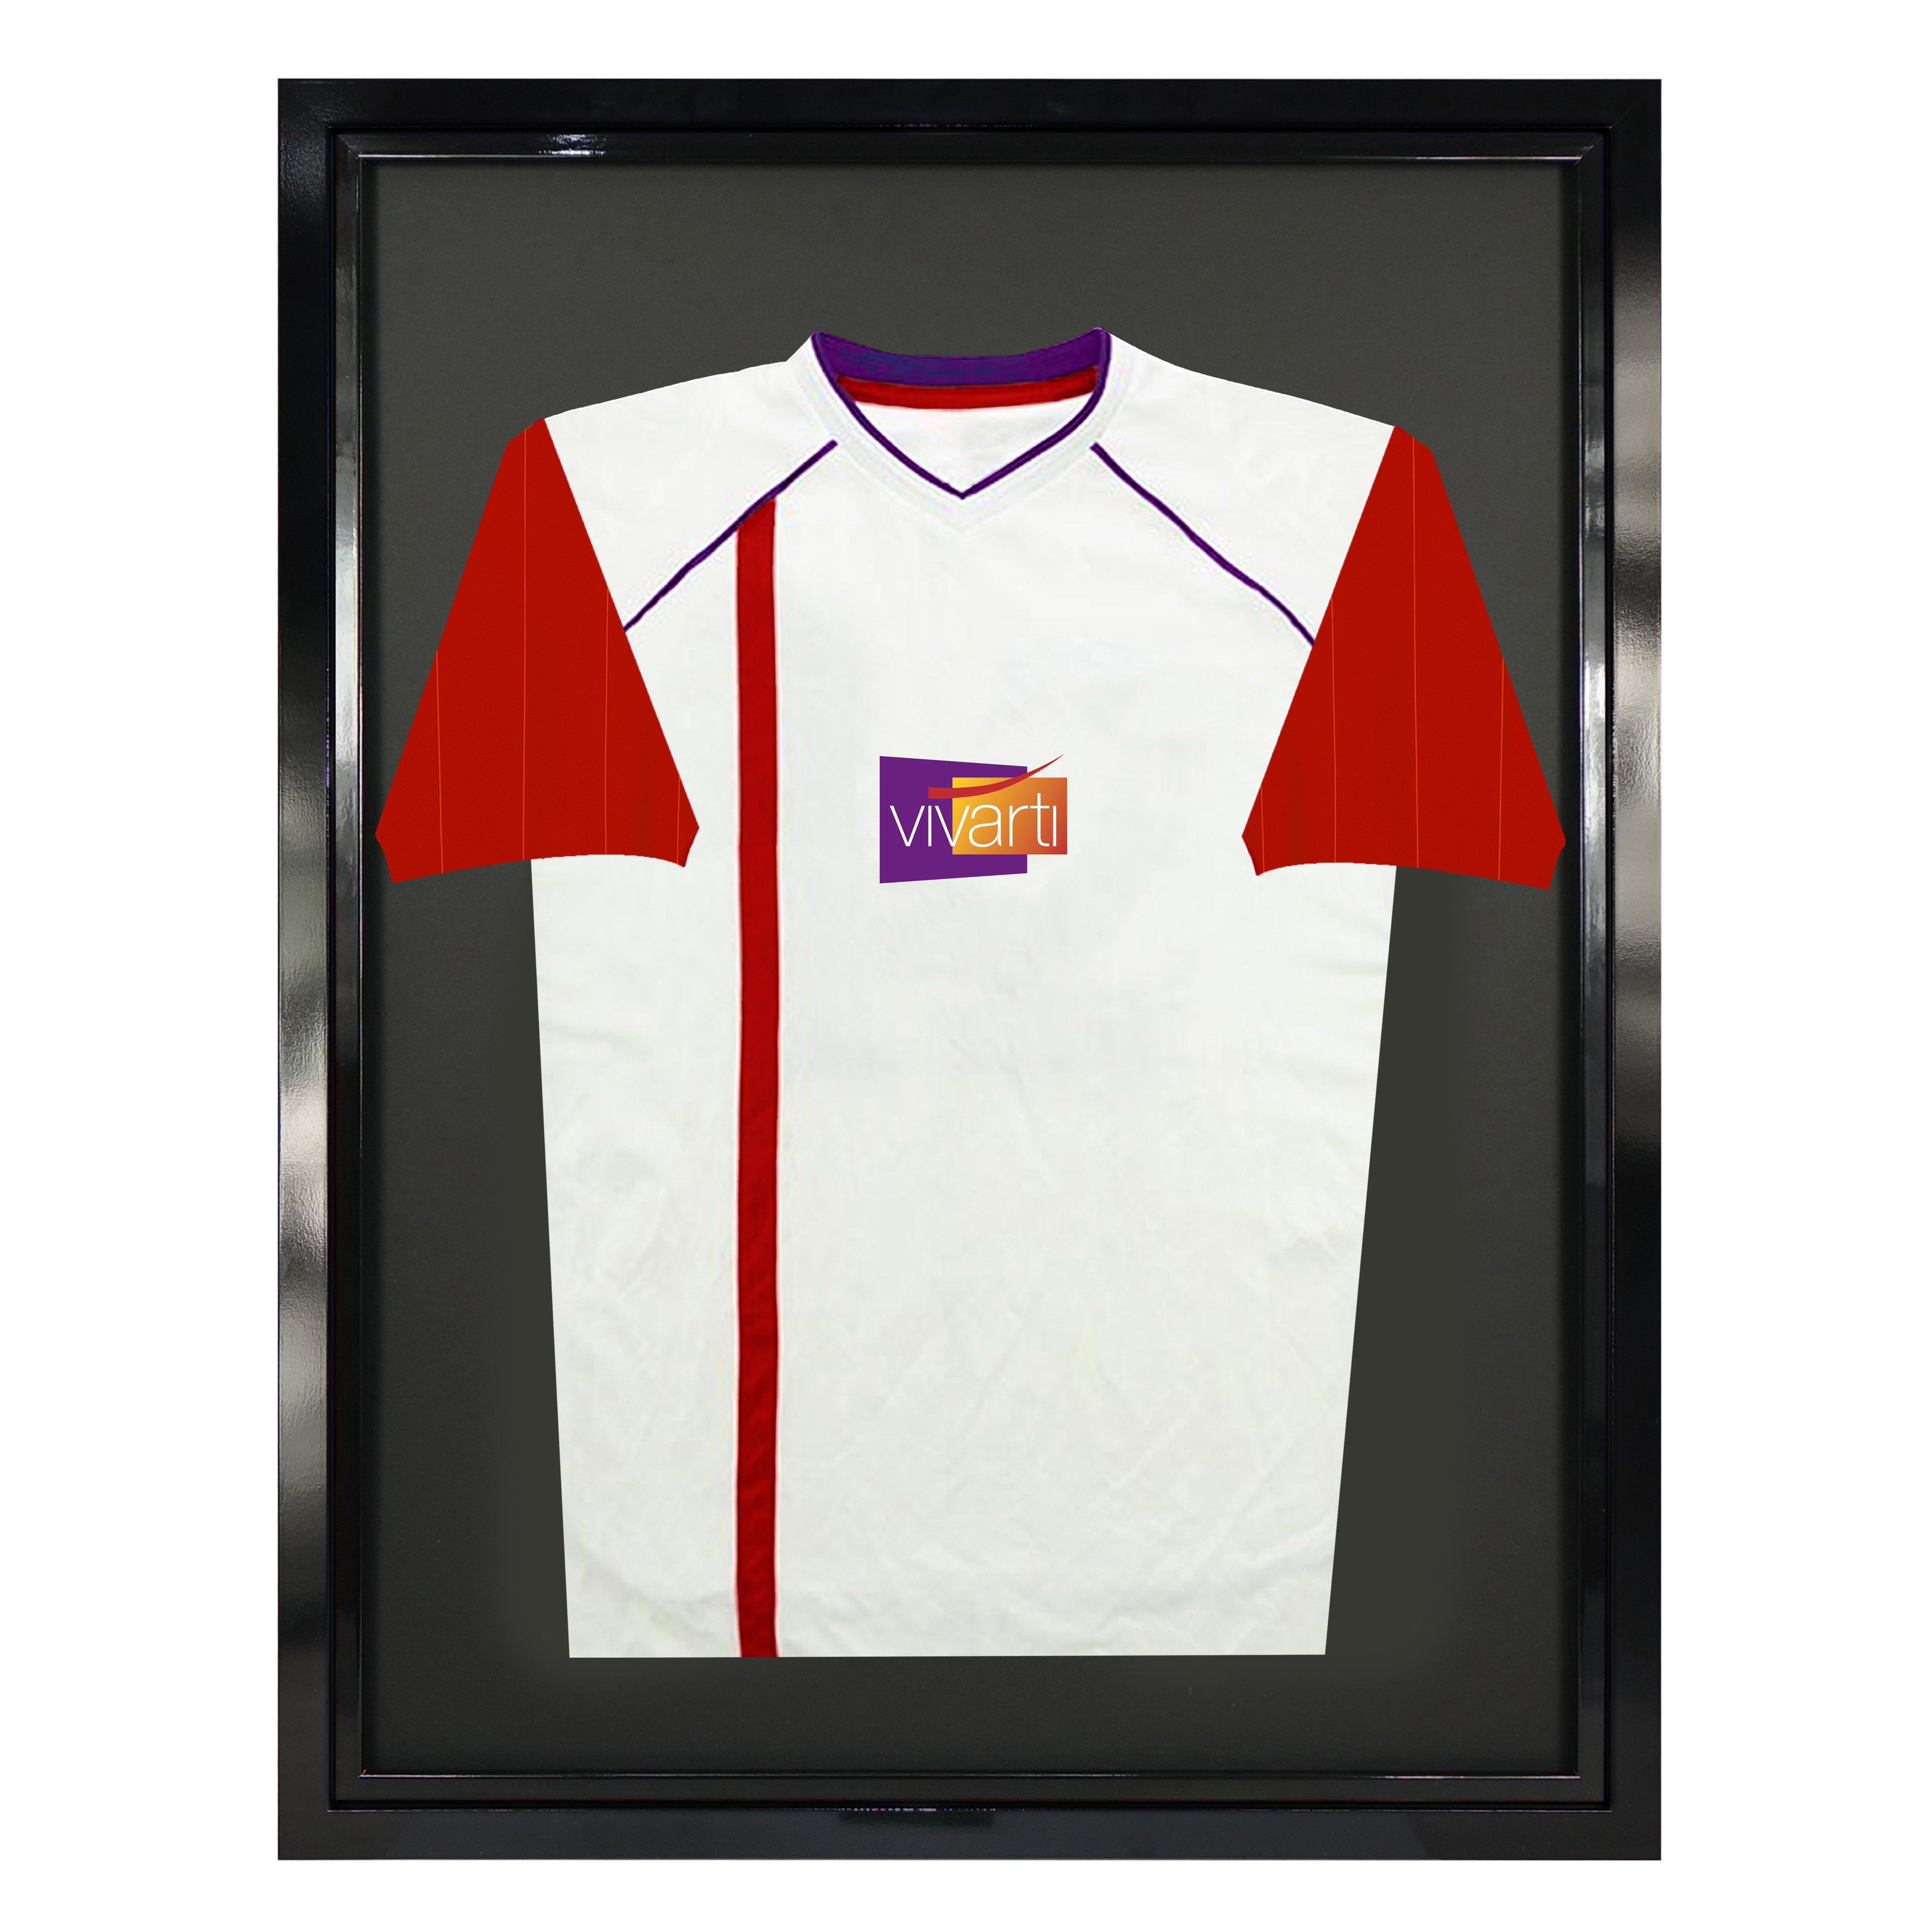 Adult Tapered Sleeve Standard Sports Shirt Display Frame with Black Frame and Black Inner Frame 60 x